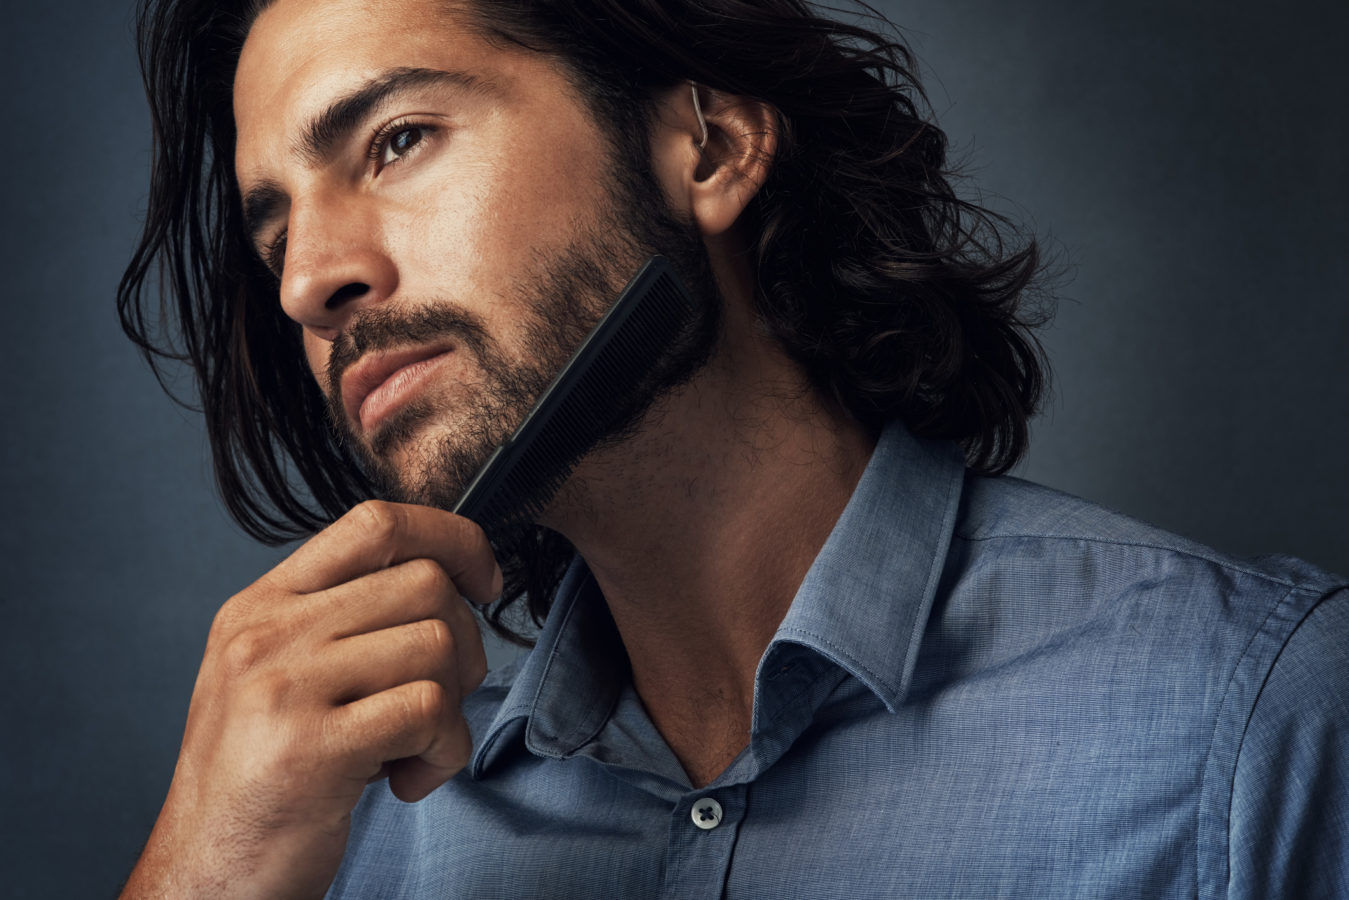 Grooming guide: What’s a beard neckline? Why does it matter? How do I trim it?